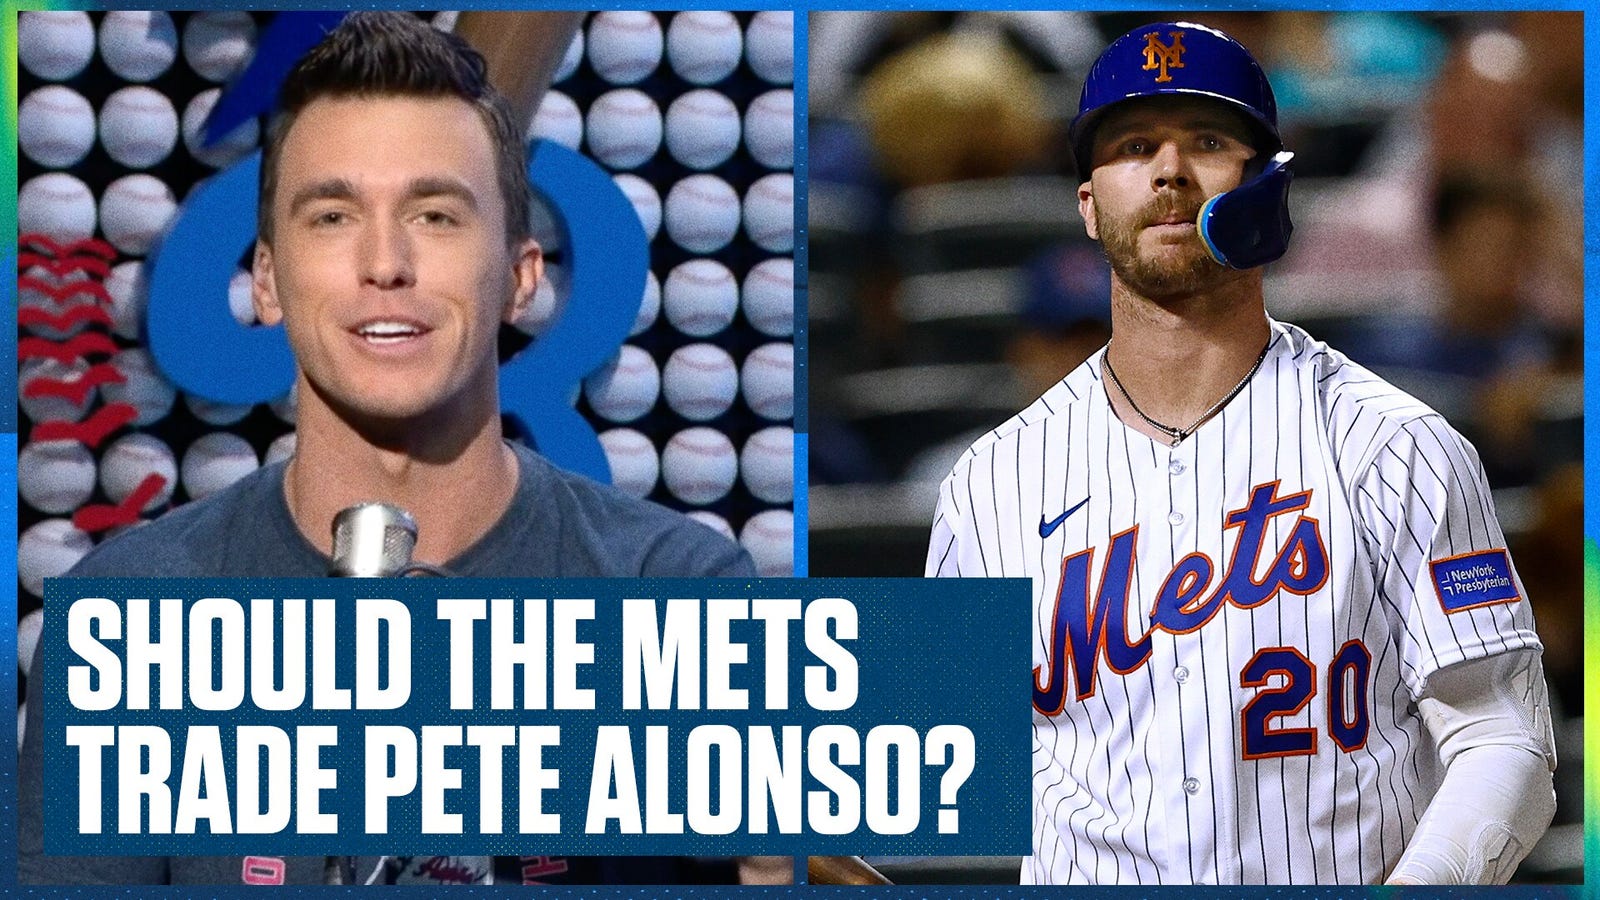 Should the Mets trade Pete Alonso?